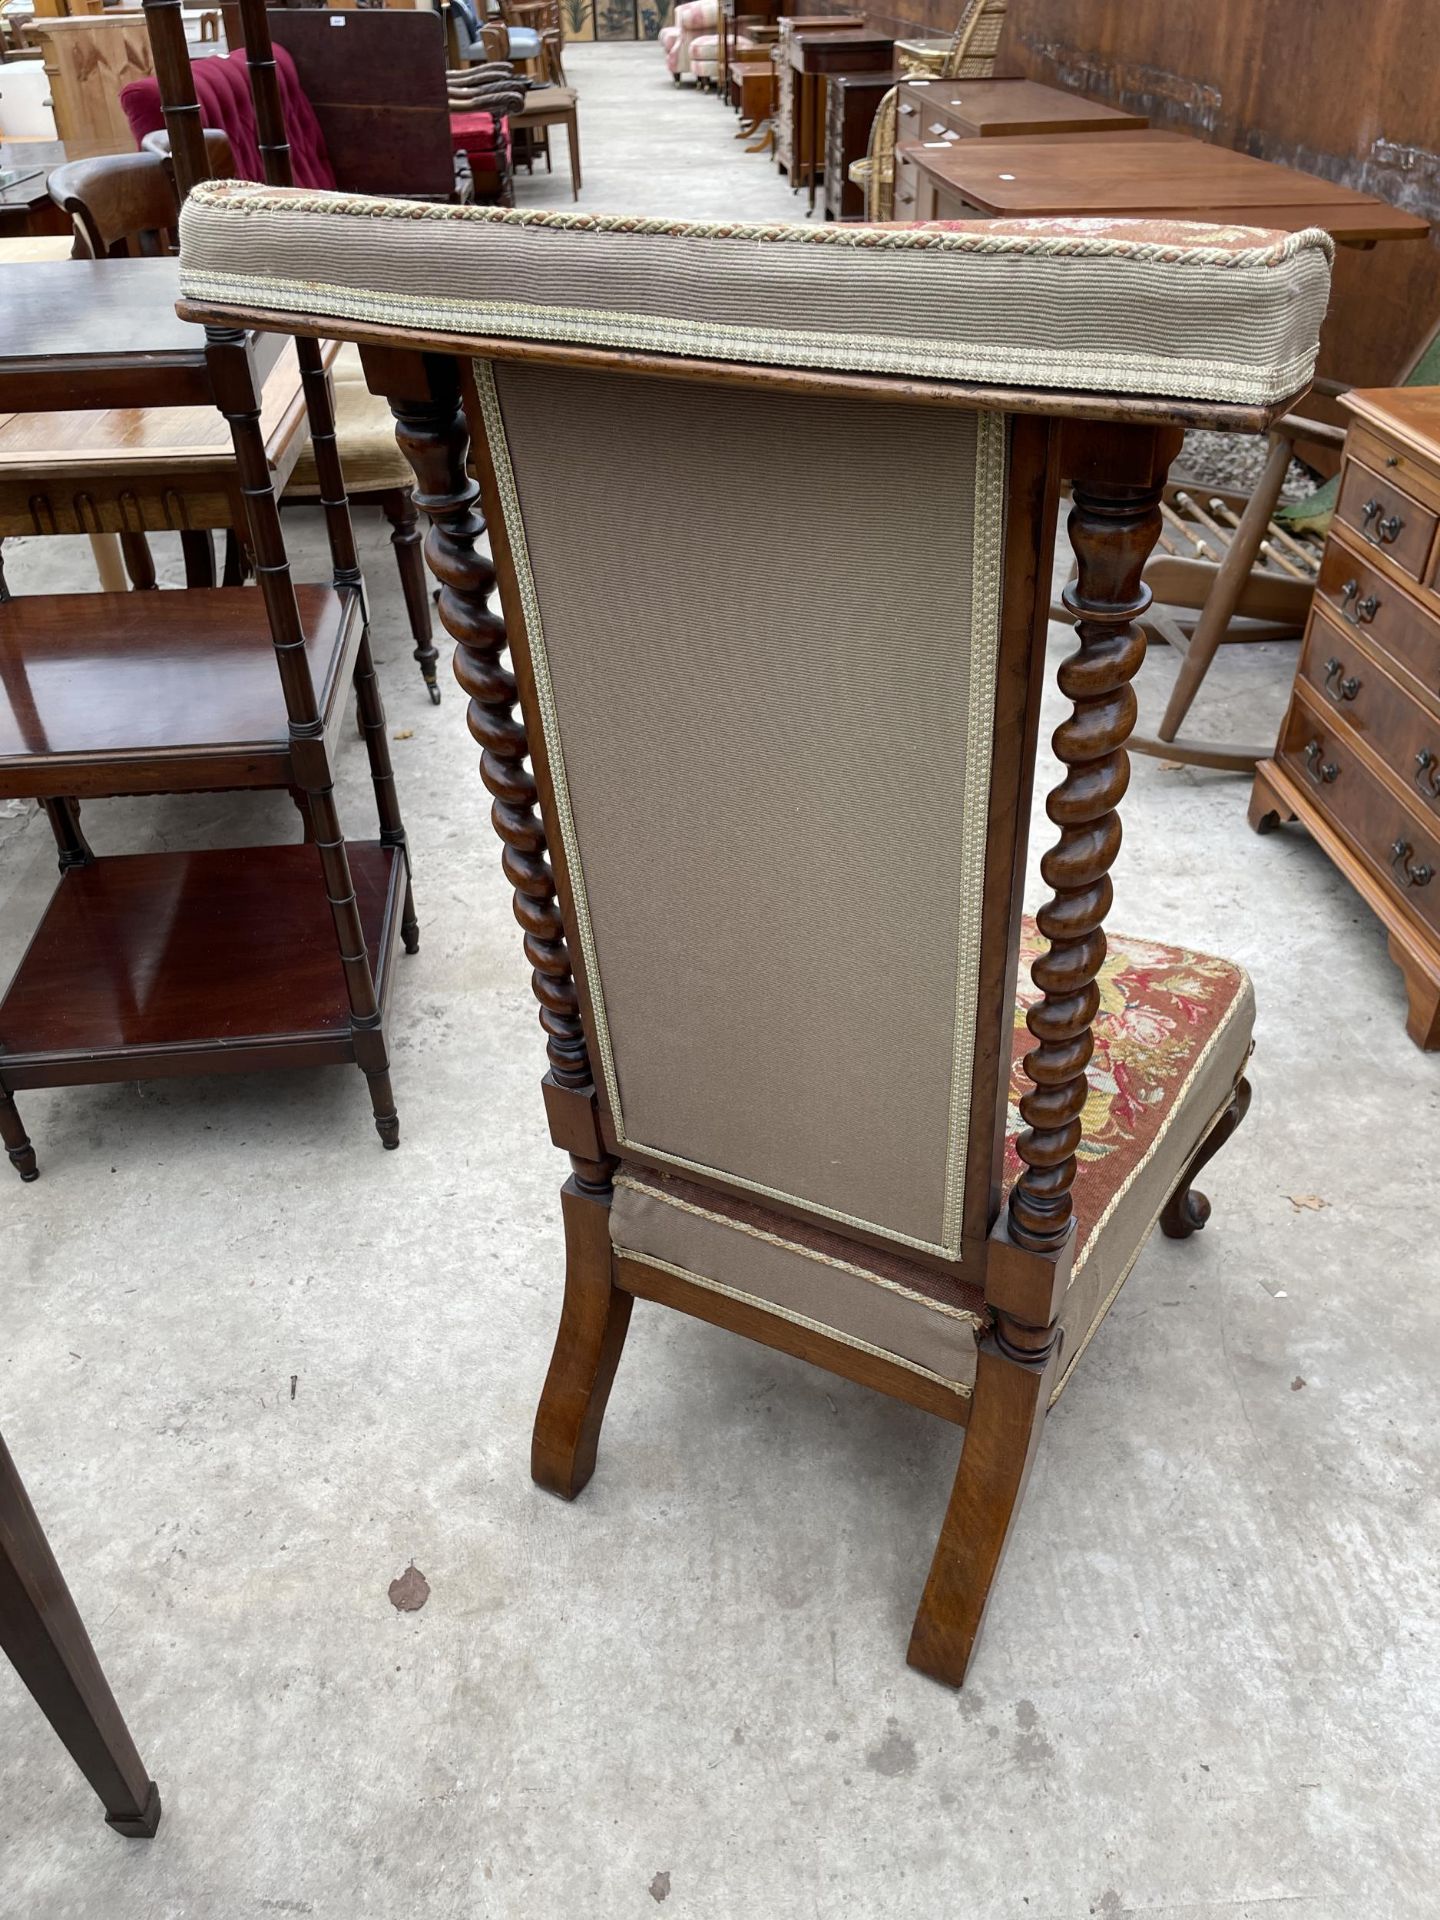 A VICTORIAN MAHOGANY PRIE DEU CHAIR WITH BARLEY TWIST UPRIGHTS AND WOOLWORK SEAT AND BACKS - Image 4 of 5